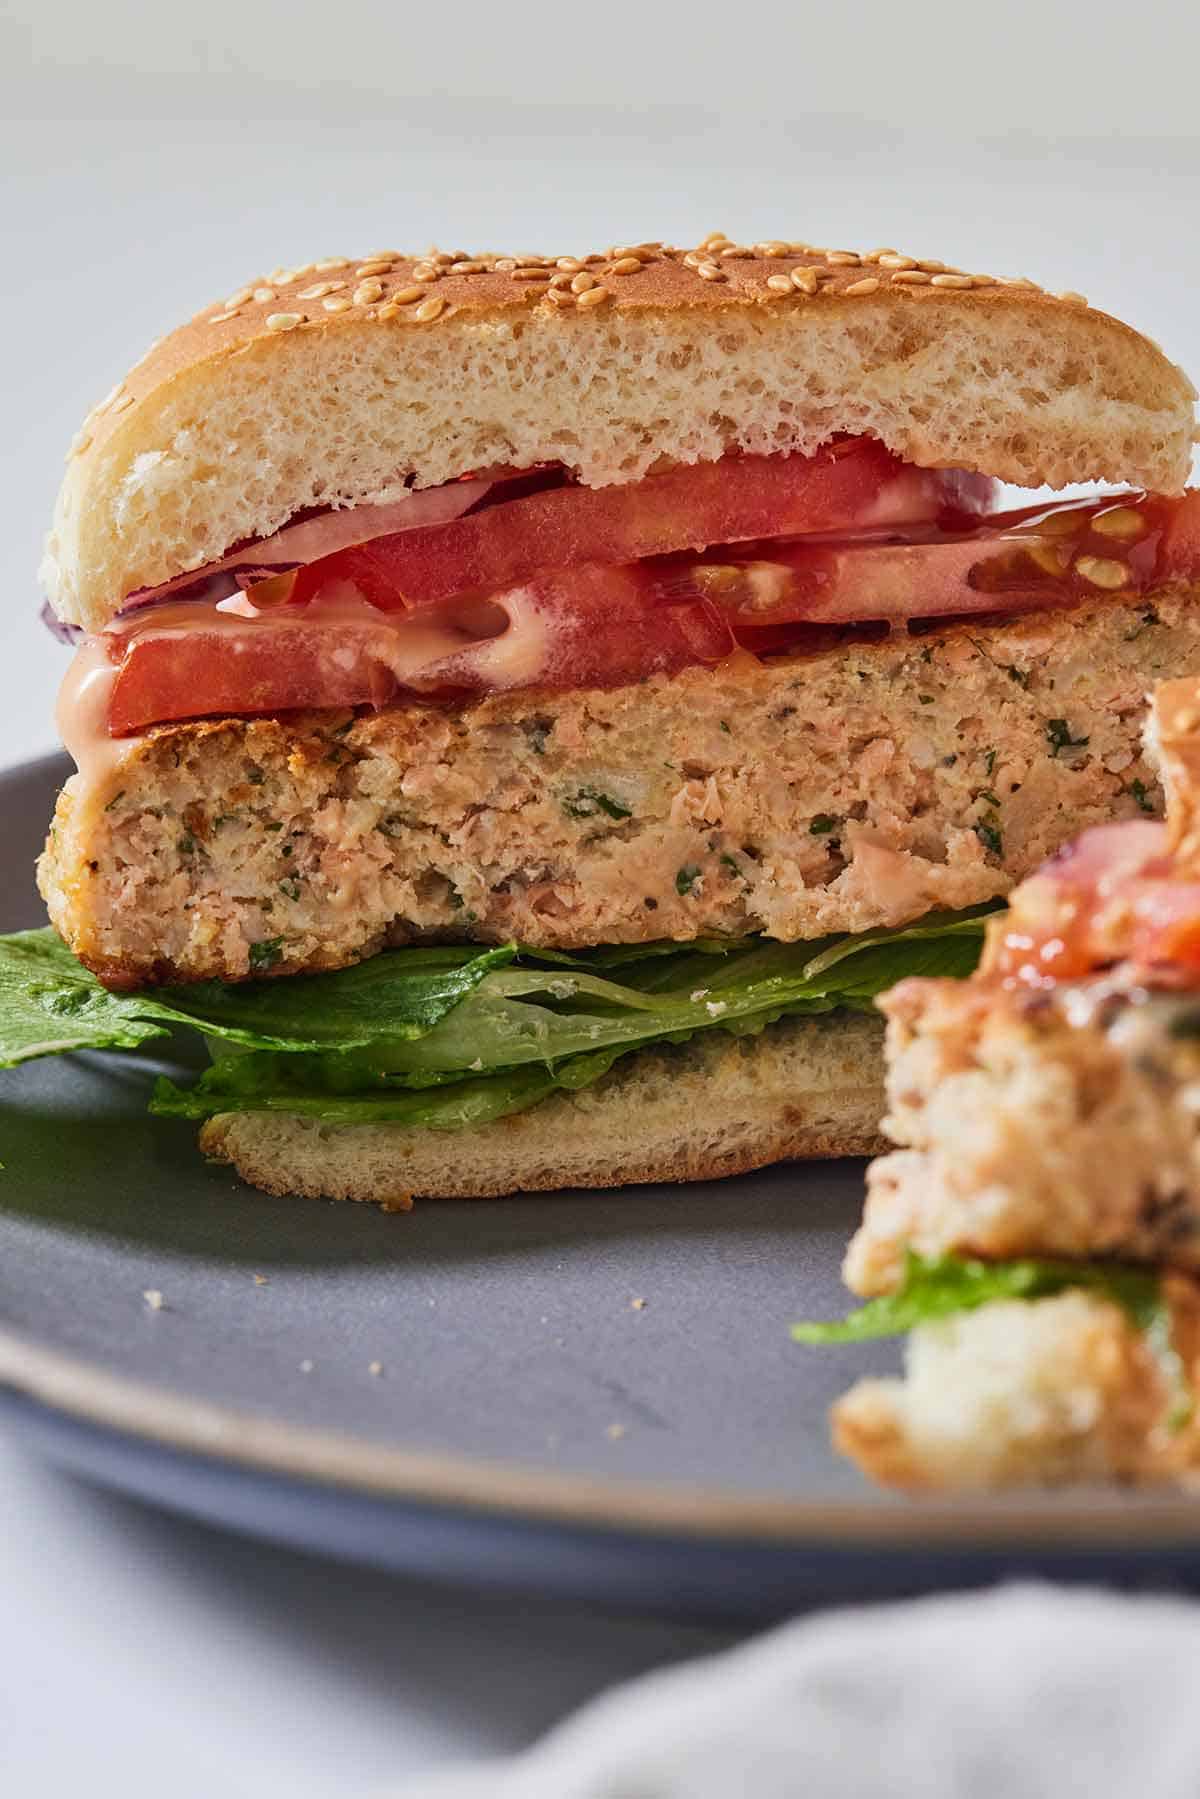 A salmon burgers, cut in half, showing the middle.